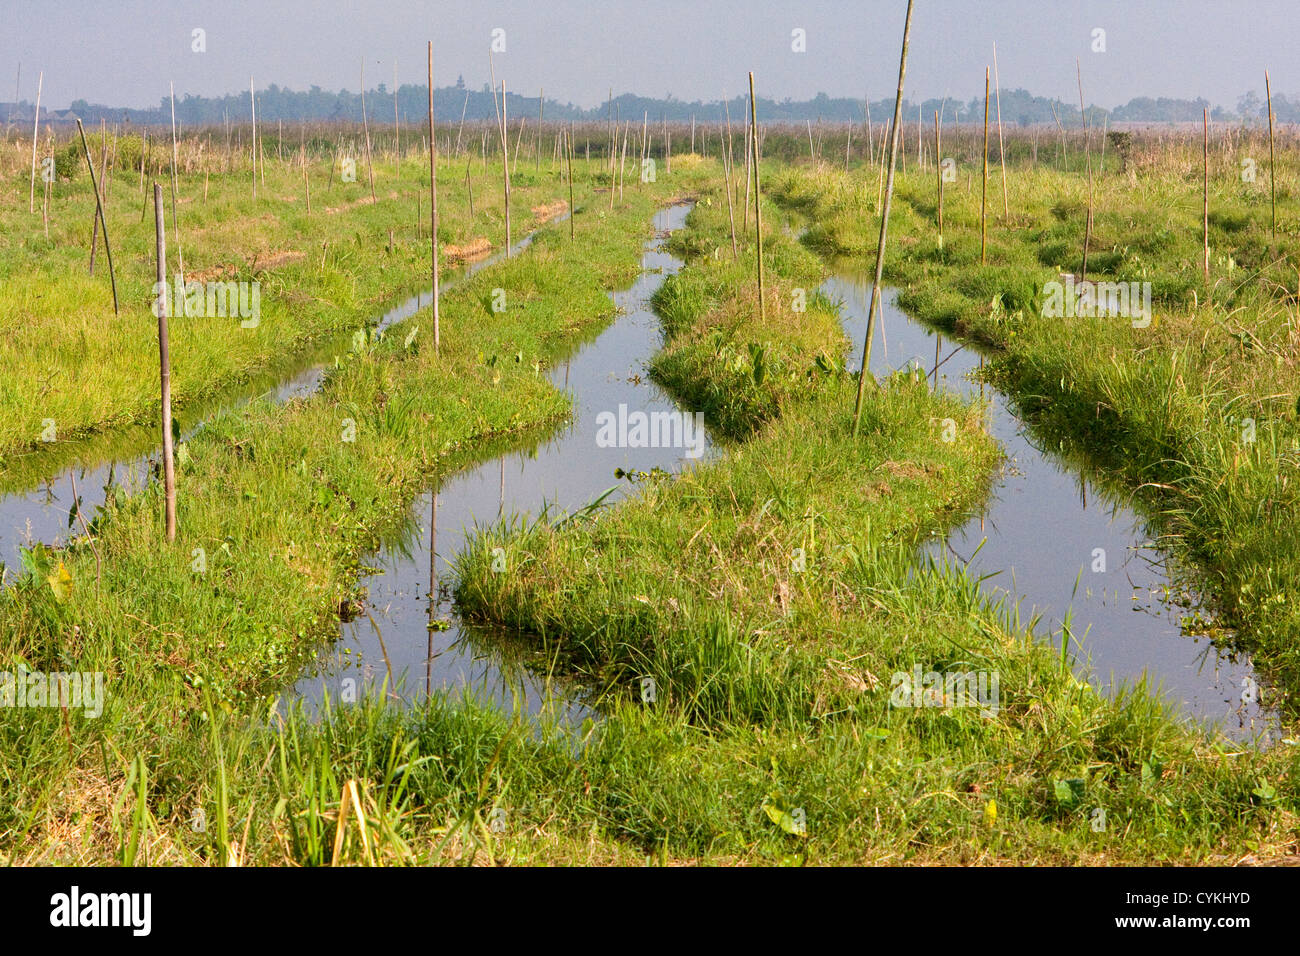 Myanmar, Burma. Floating Plots for Agriculture, Inle Lake, Shan State. The tall poles anchor the islands to the lake bottom. Stock Photo